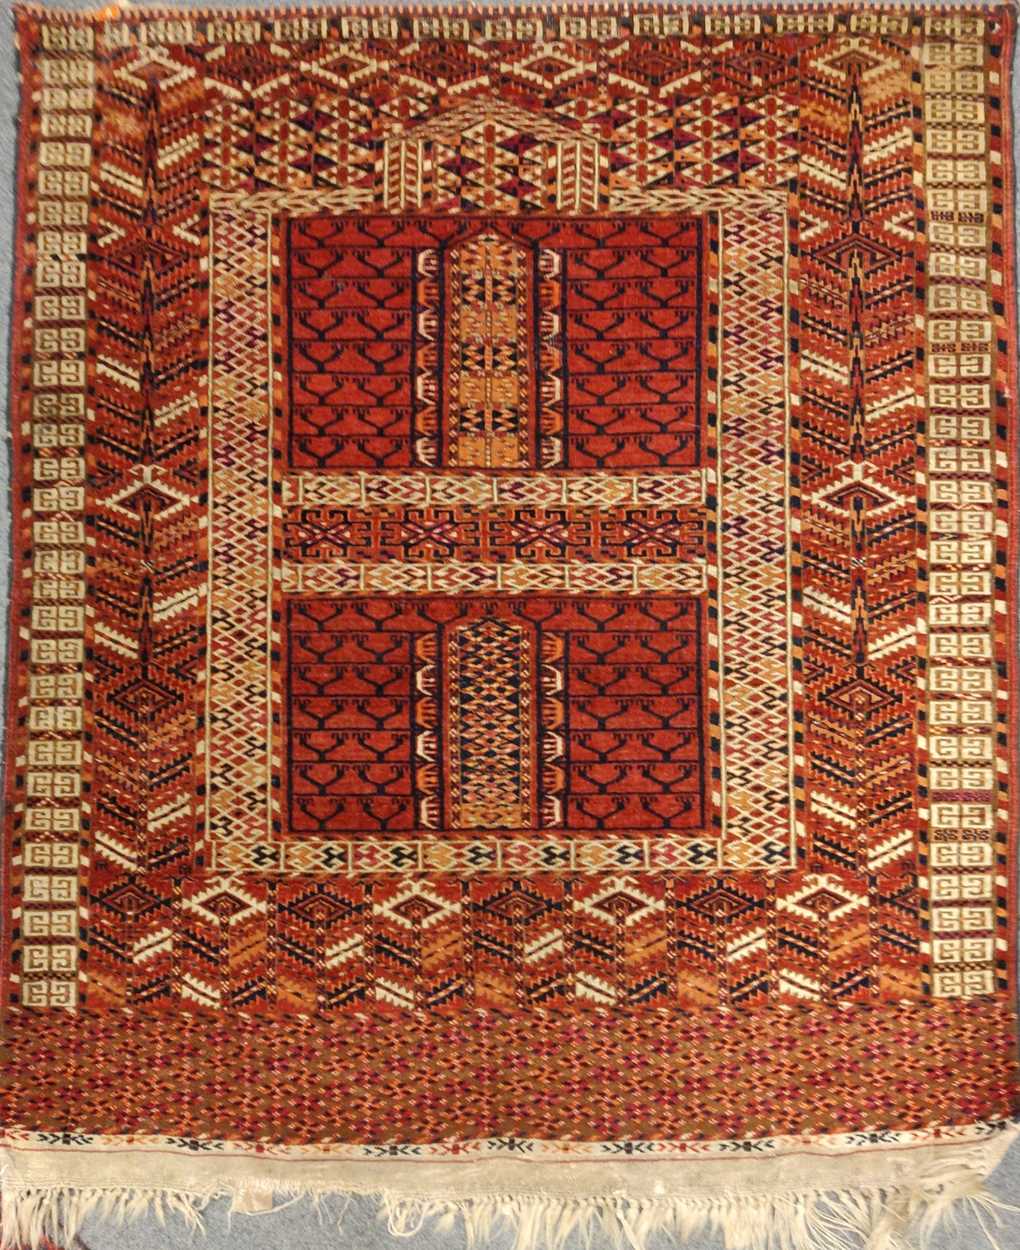 Early 20th century Tekke Ensi 155 x 121cmGeneral wear and fraying to the edges and tassels Holes